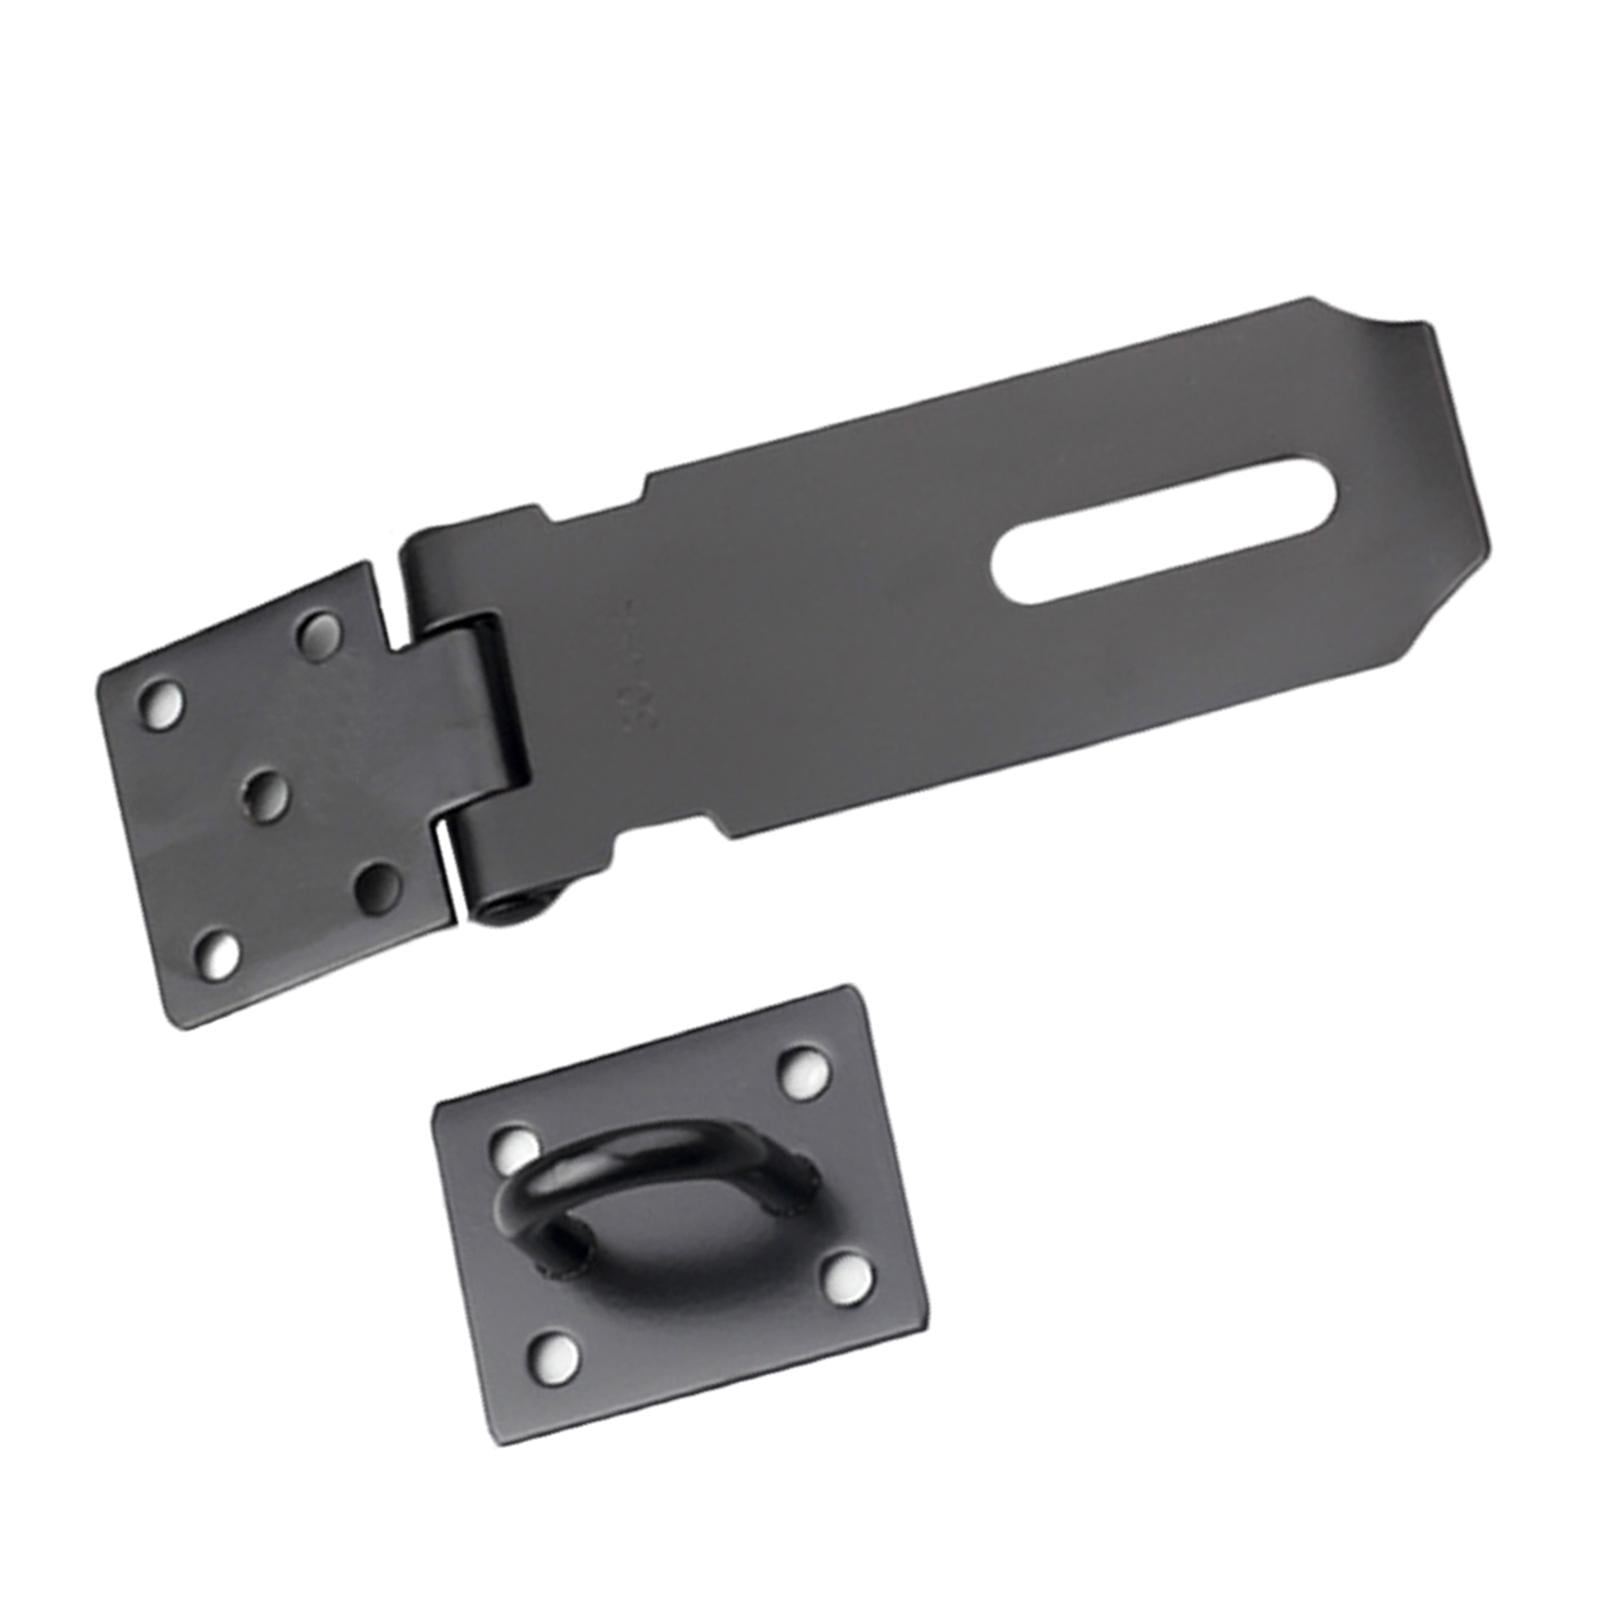 SALE 6 inch 150 mm hasp and staple black metal Box of 10 